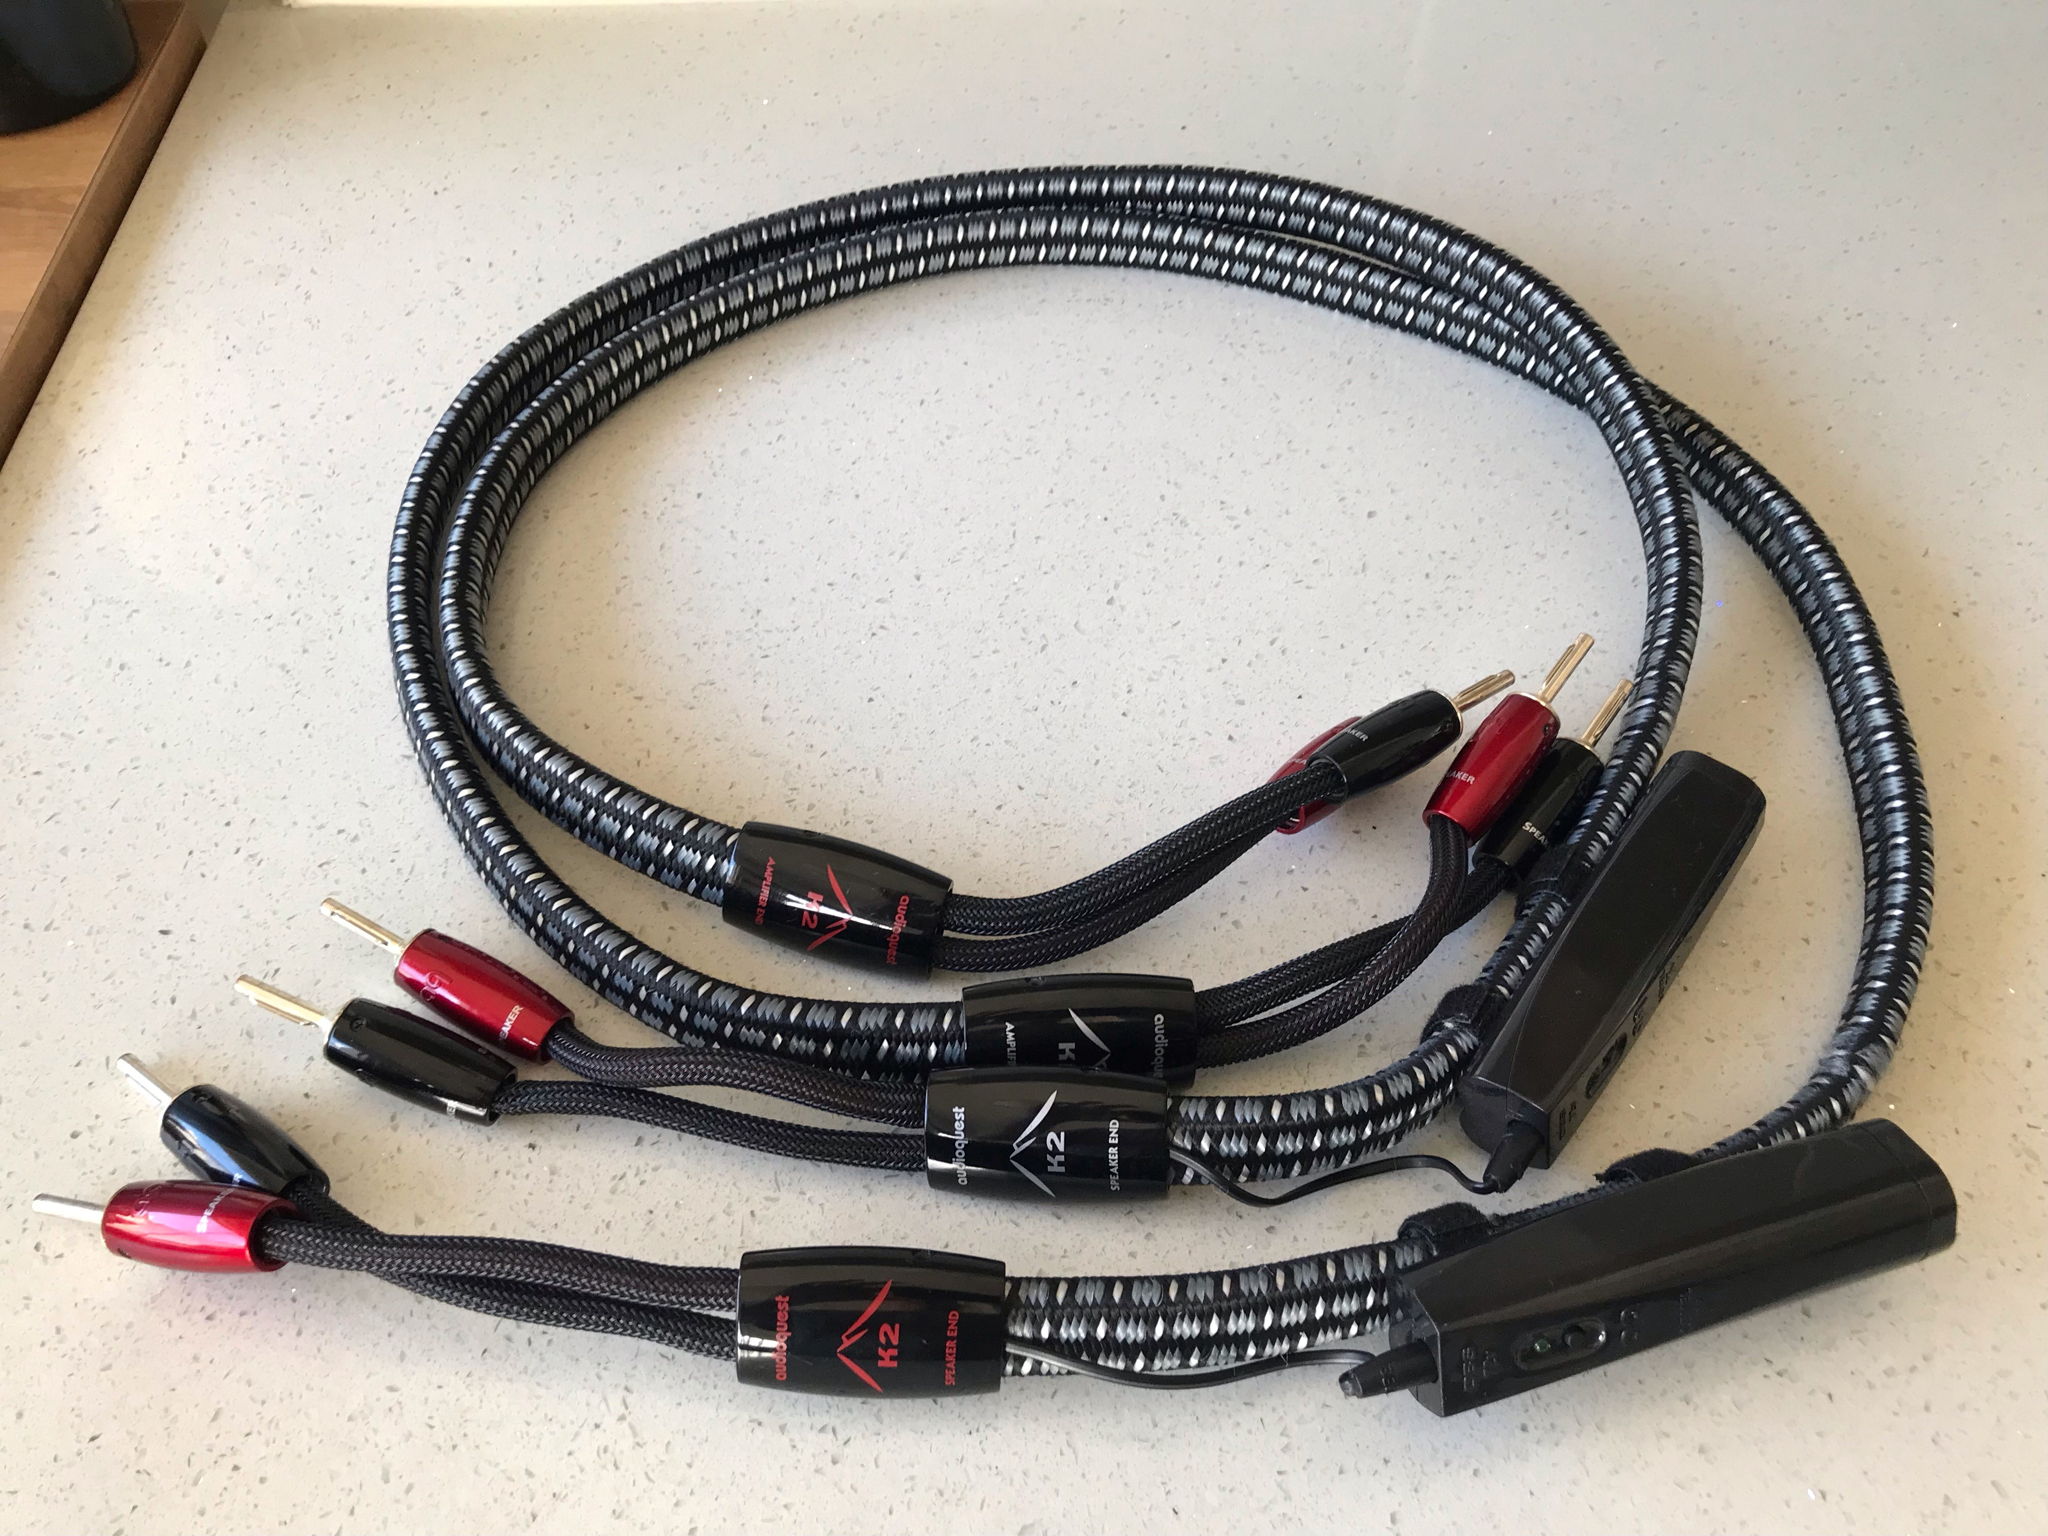 AudioQuest  K2 Silver Speaker Cables 1 Meter (2 available)